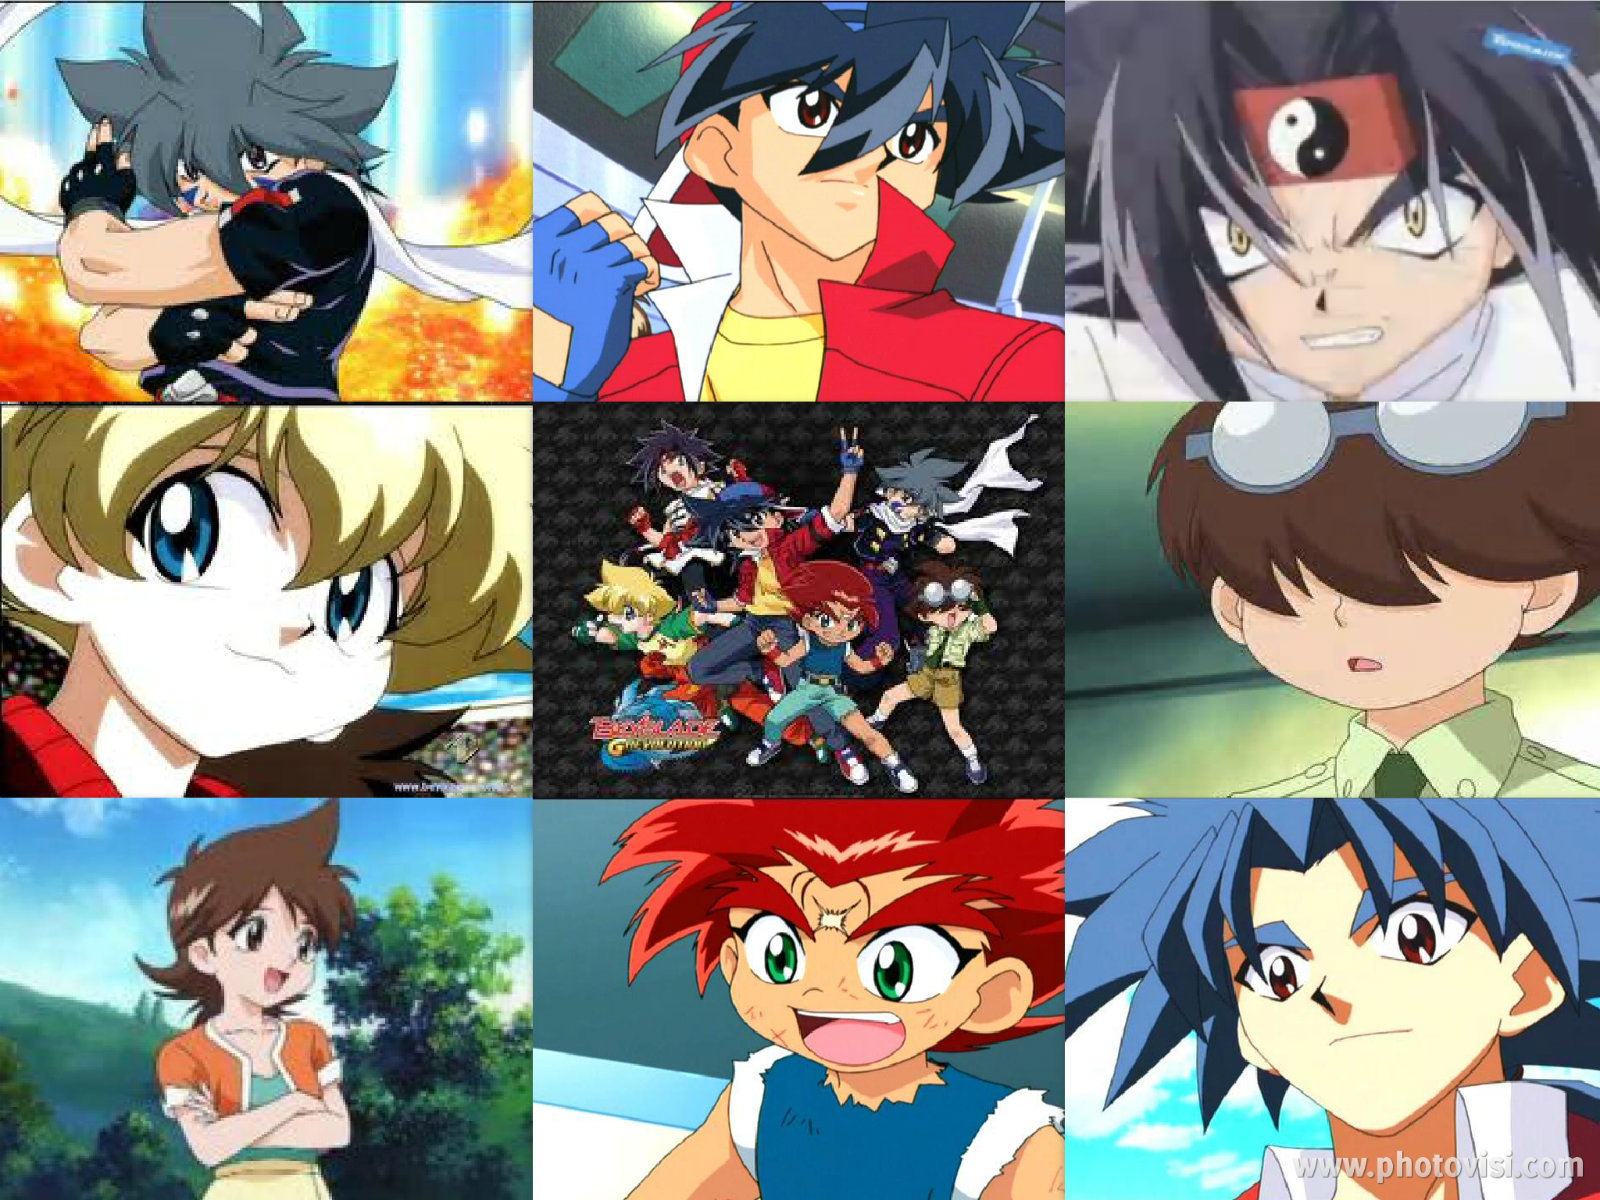 Photo of Bladebreakers! for fans of Beyblade. 